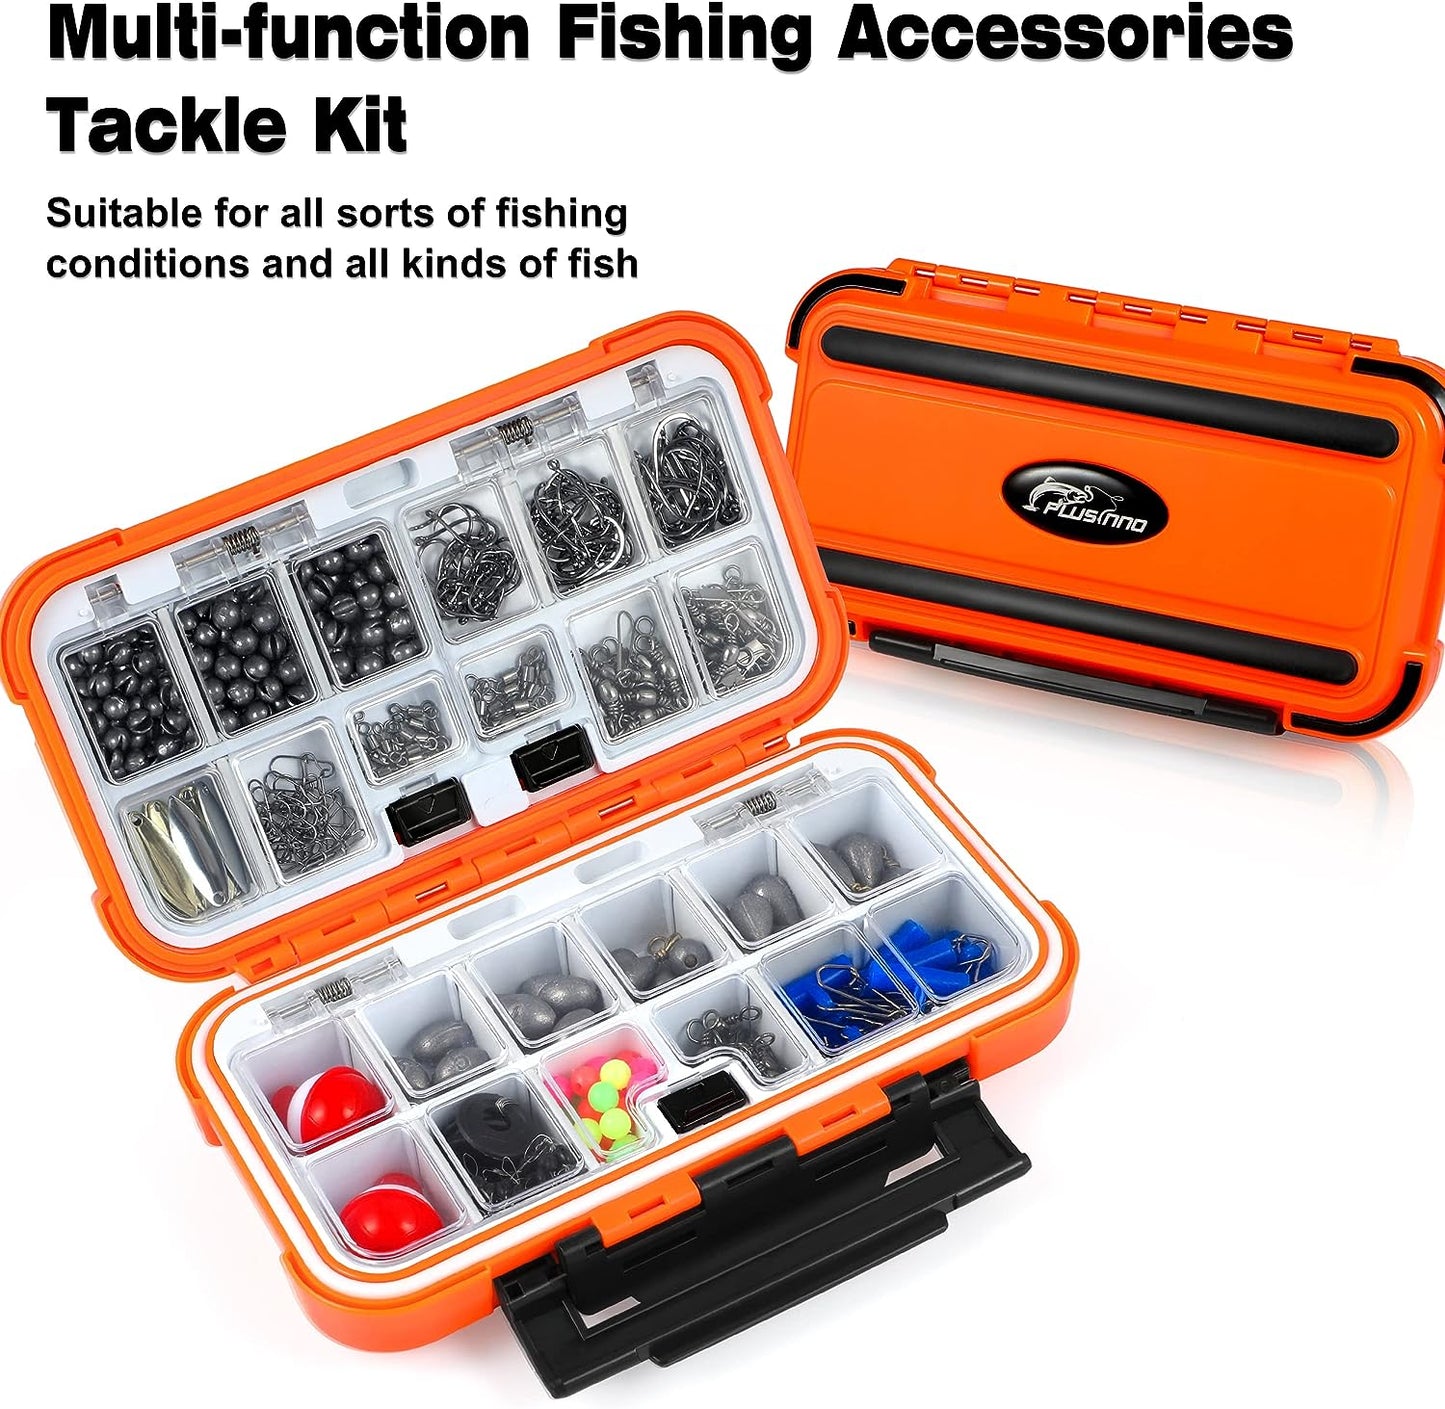 253/108Pcs Fishing Accessories Kit, Fishing Tackle Box with Tackle Included, Fishing Hooks, Fishing Weights, Spinner Blade, Fishing Gear for Bass, Bluegill, Crappie